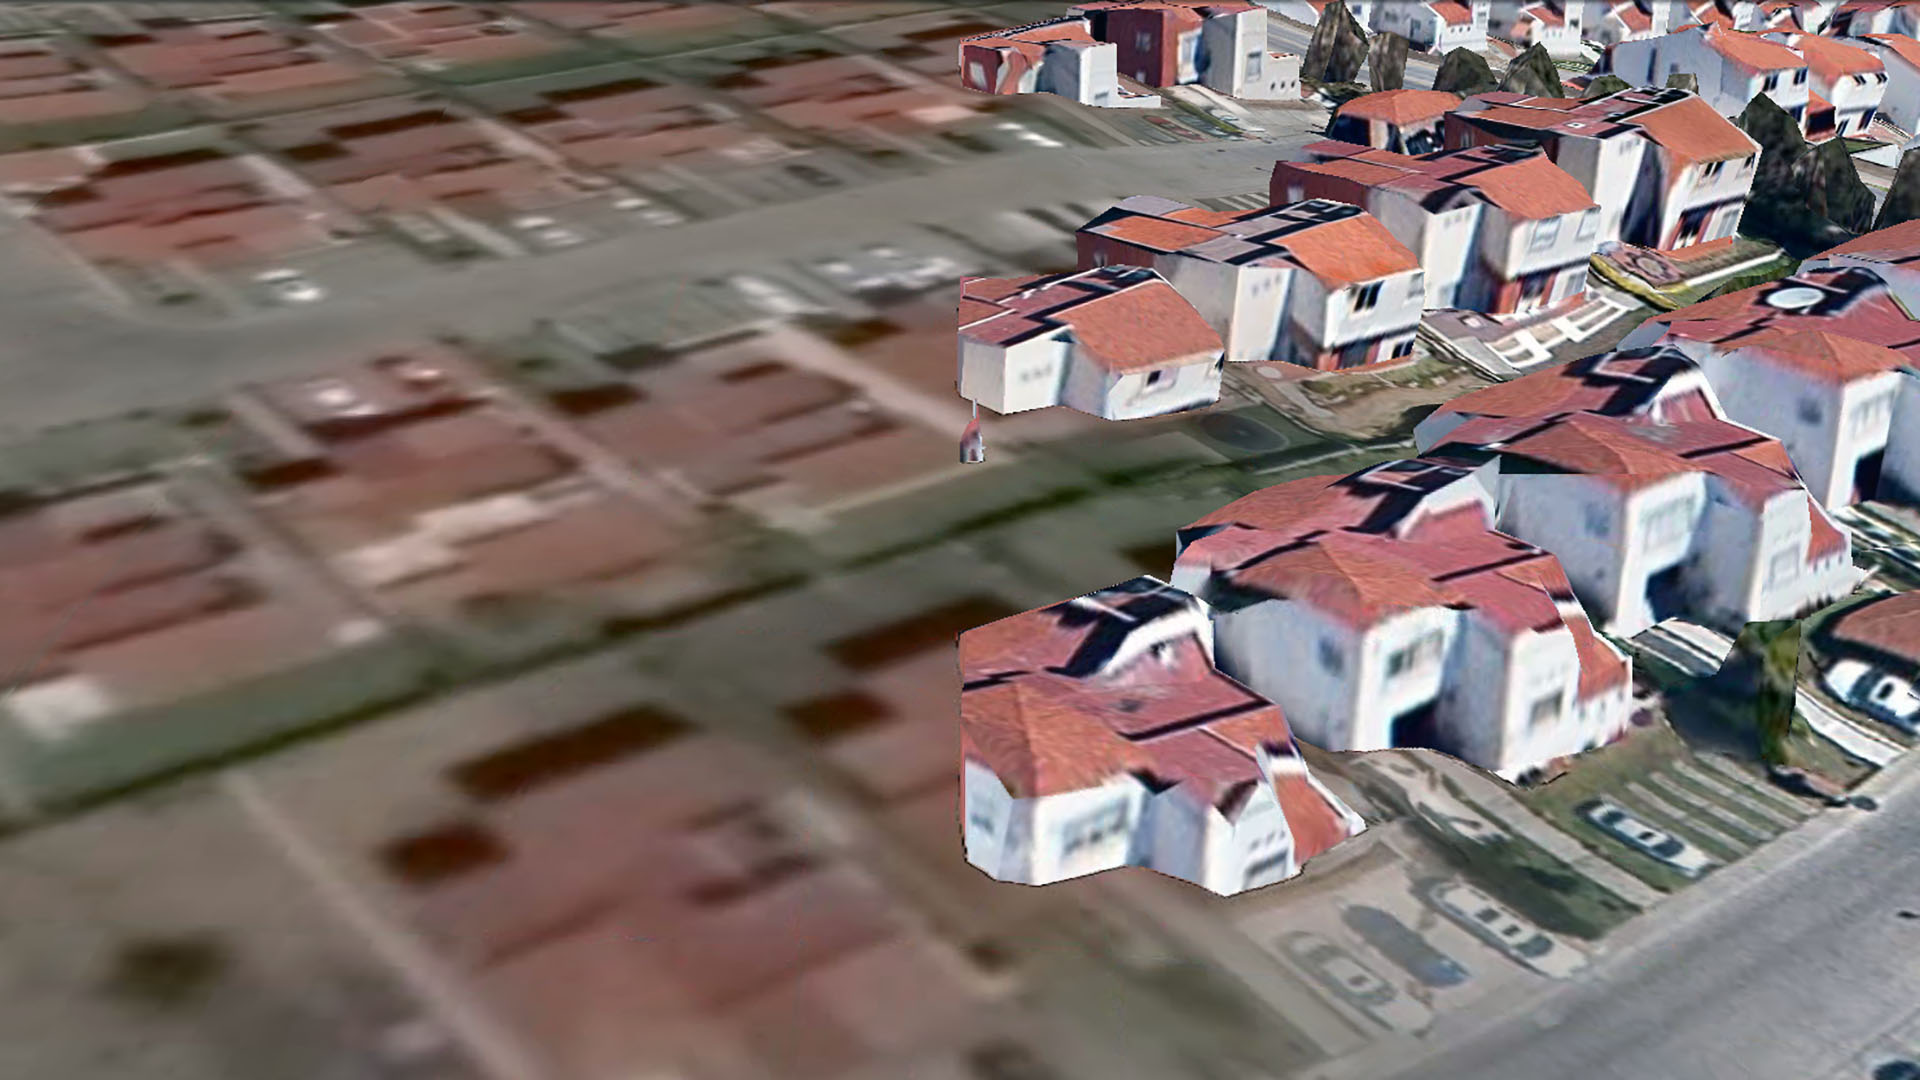 Real Esmeralda, a housing development in Andalucía, on the northwest frontier of the digital model of Mexico City, as rendered in Google Earth 7.1.2.2041.